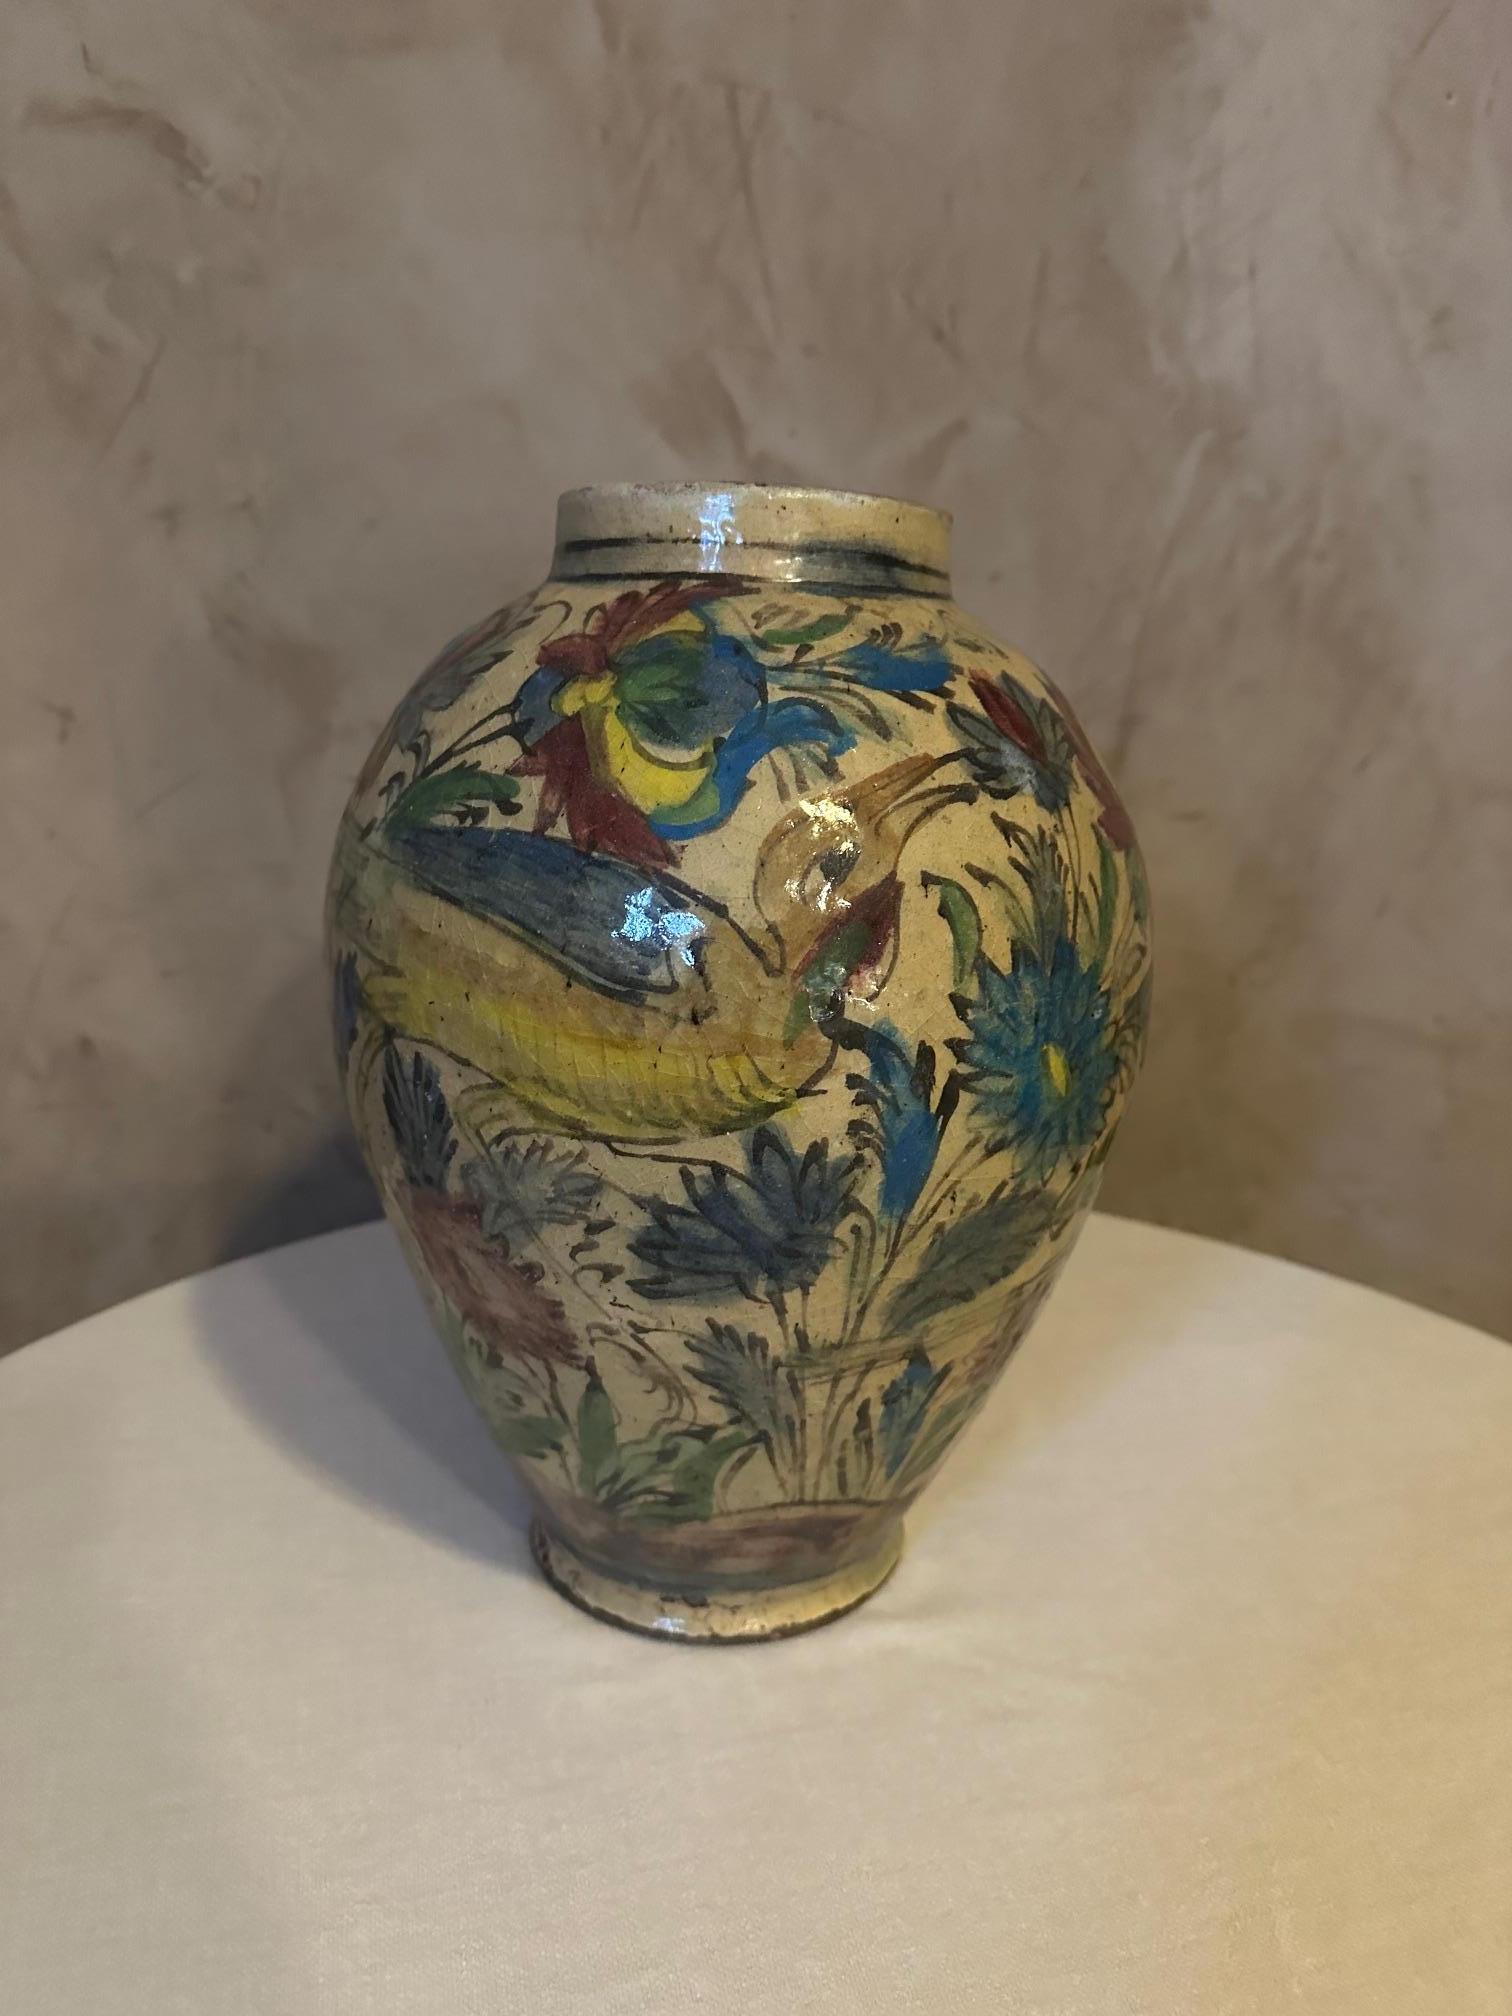 Very beautiful vase in enamelled polychrome painted ceramic. 
Persian, Qajar dynasty dating from 1900. 
Beautiful painted decoration of birds and flowering branches. 
Nice quality. Small chip below the foot.
​